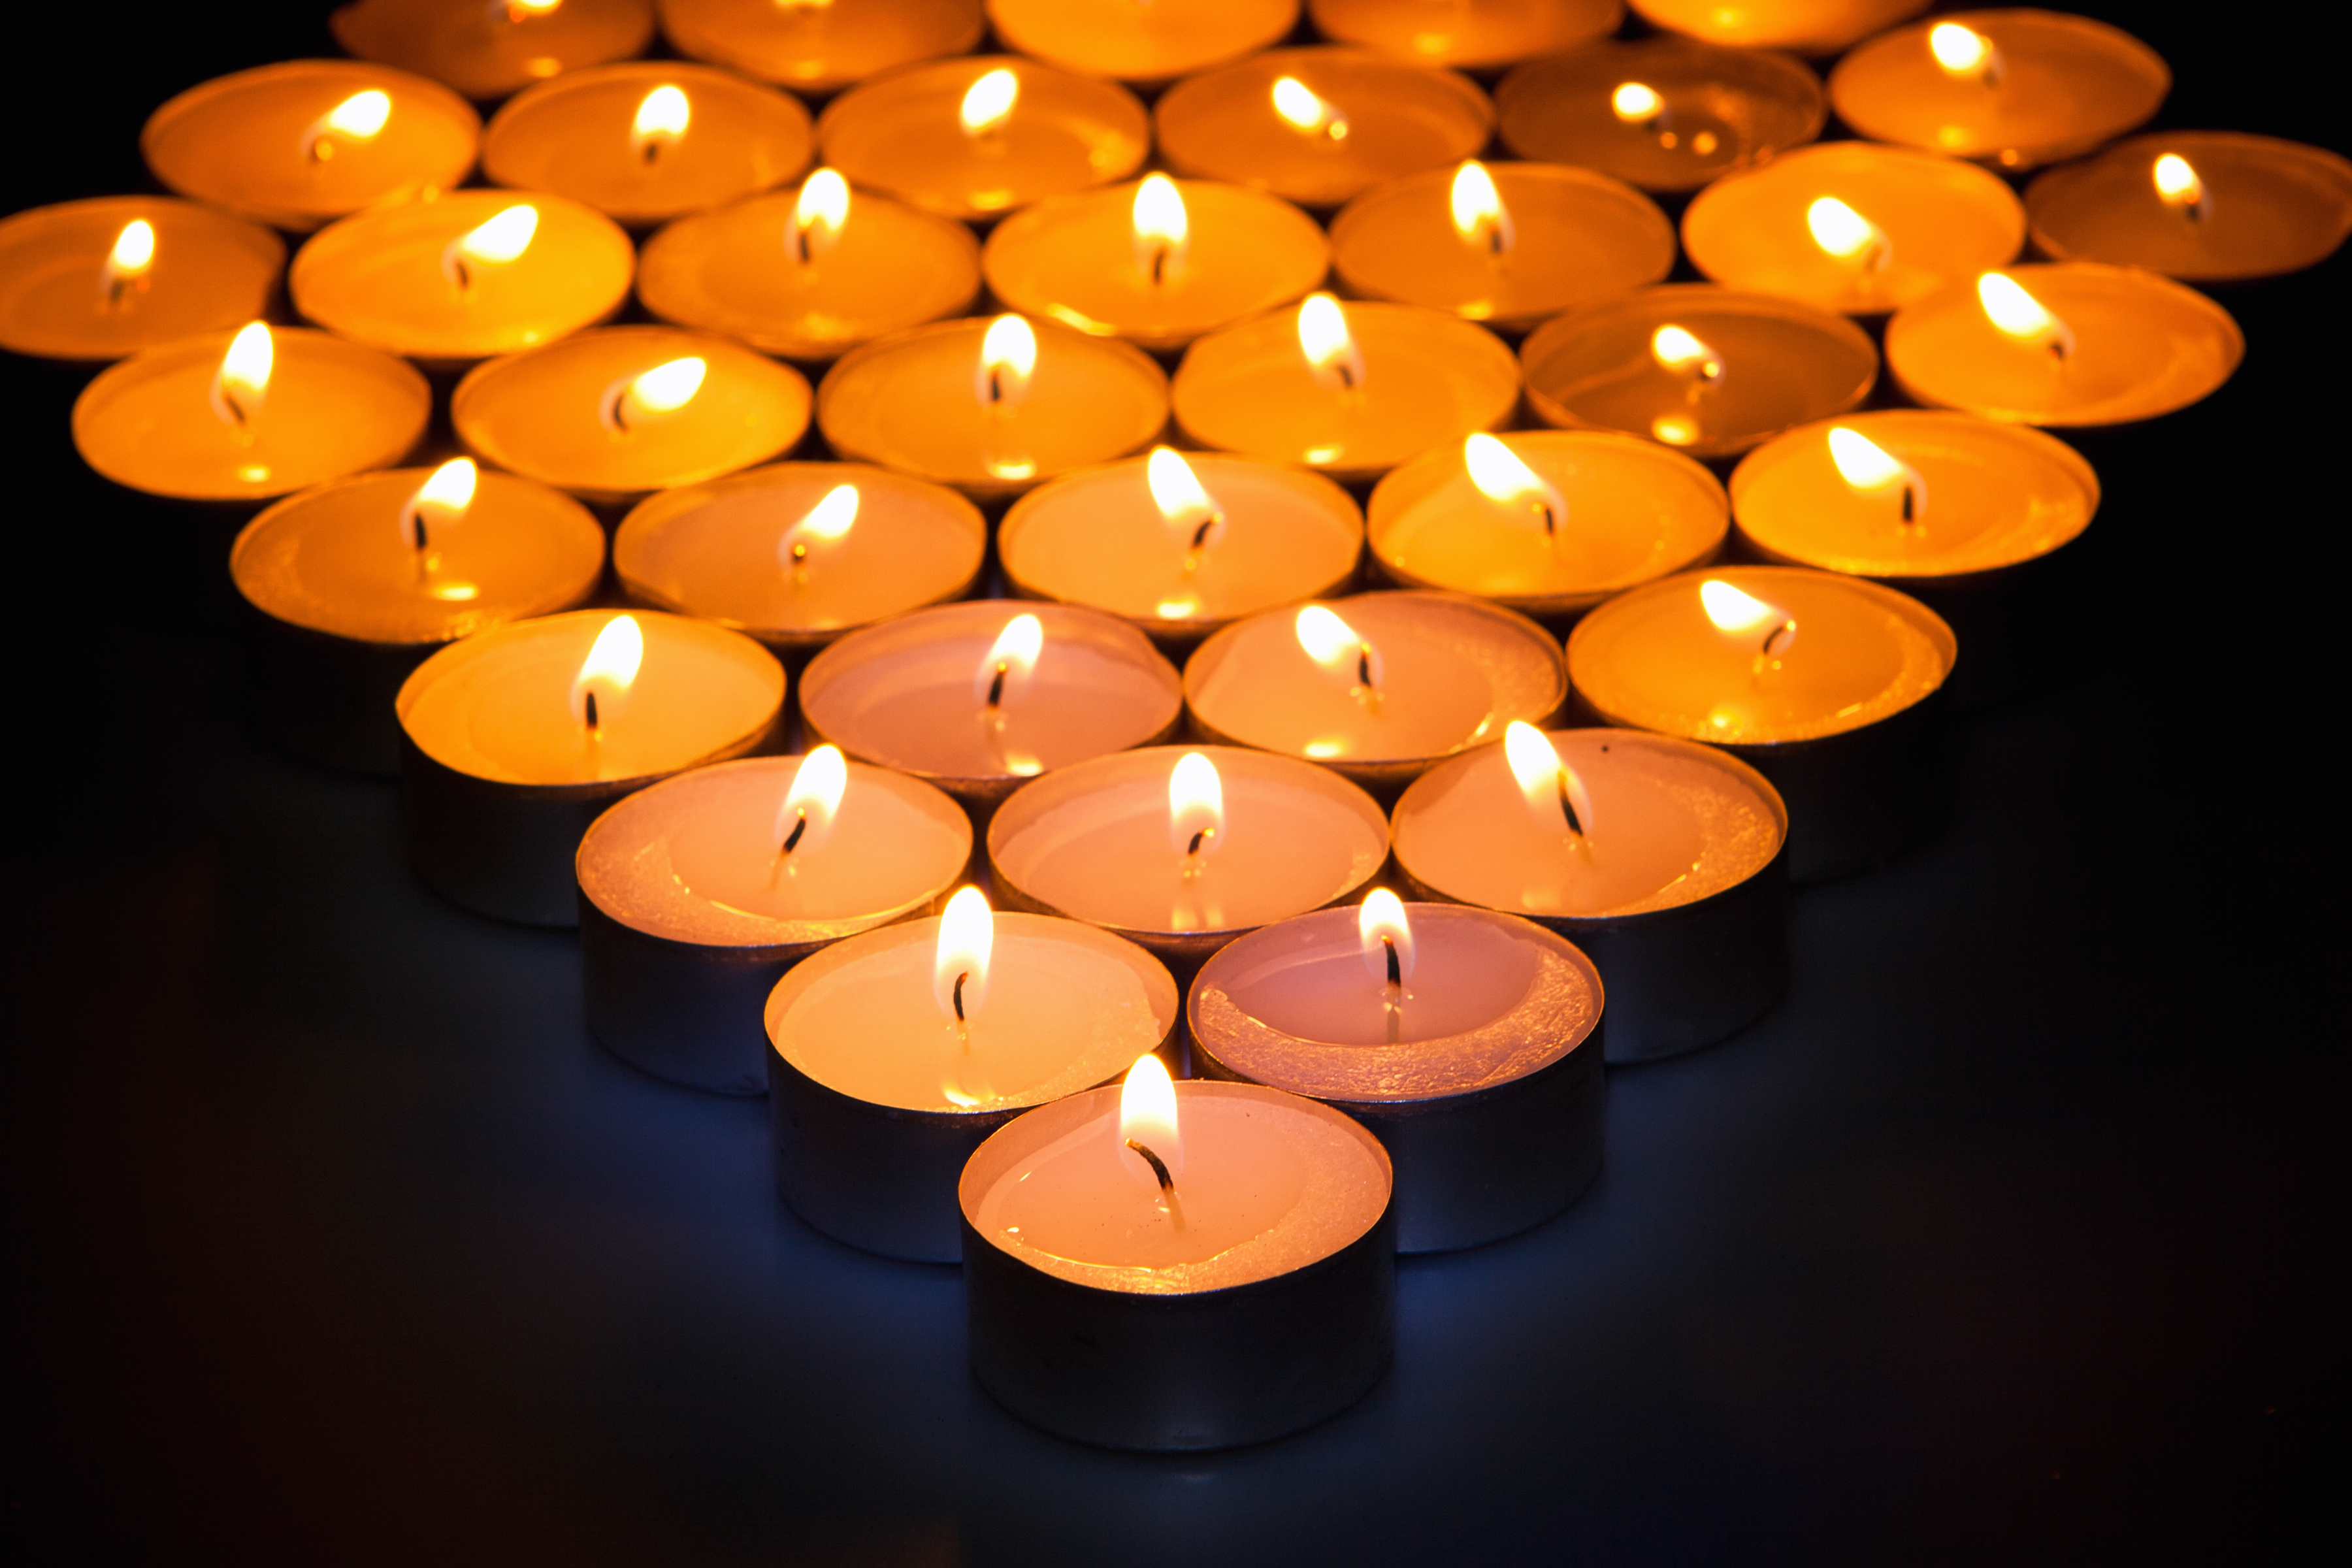 Candles photo